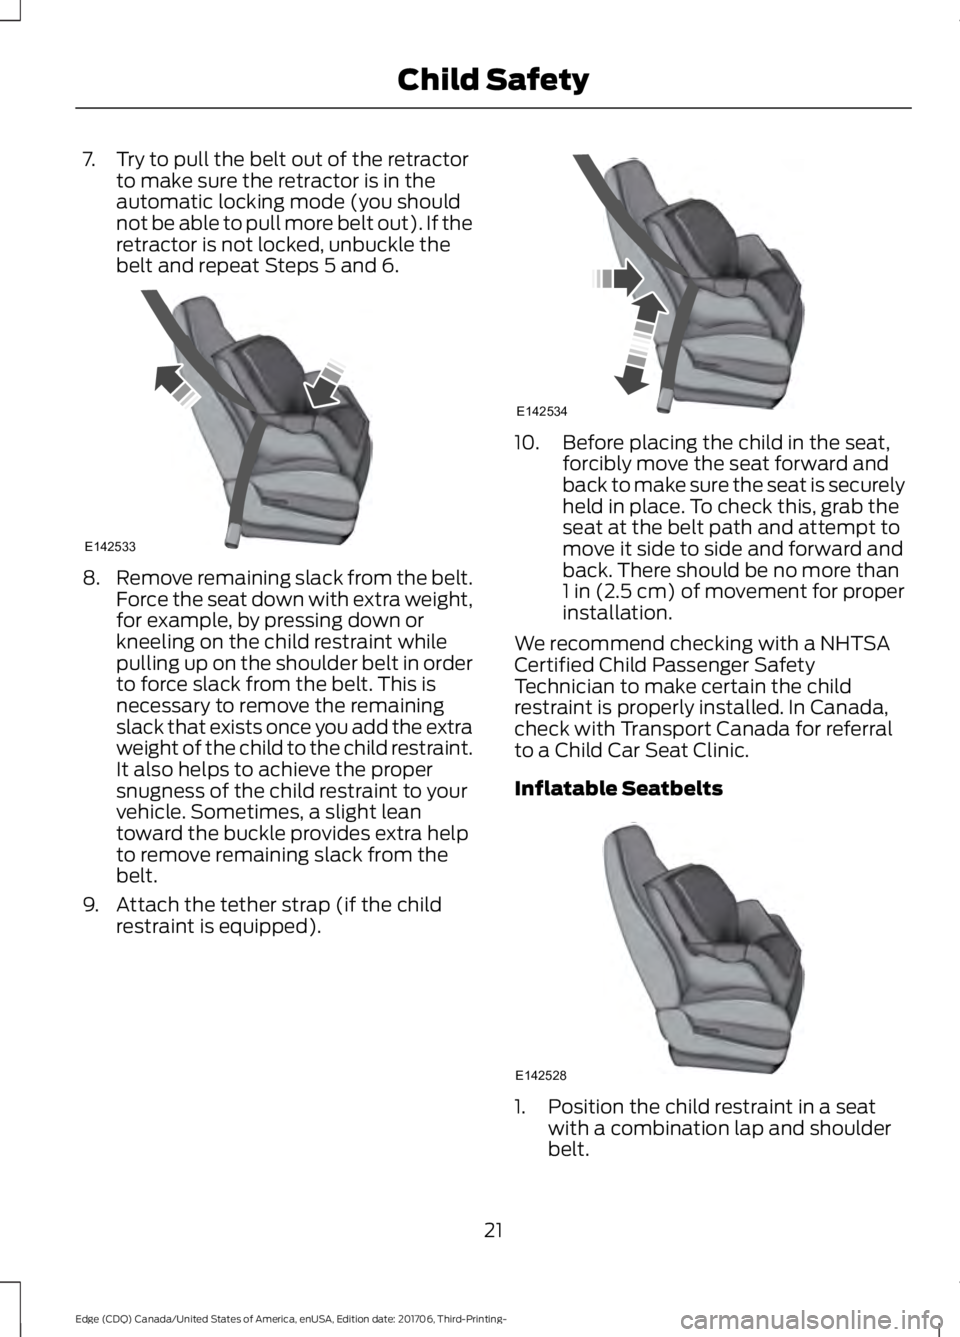 FORD EDGE 2018  Owners Manual 7. Try to pull the belt out of the retractor
to make sure the retractor is in the
automatic locking mode (you should
not be able to pull more belt out). If the
retractor is not locked, unbuckle the
be